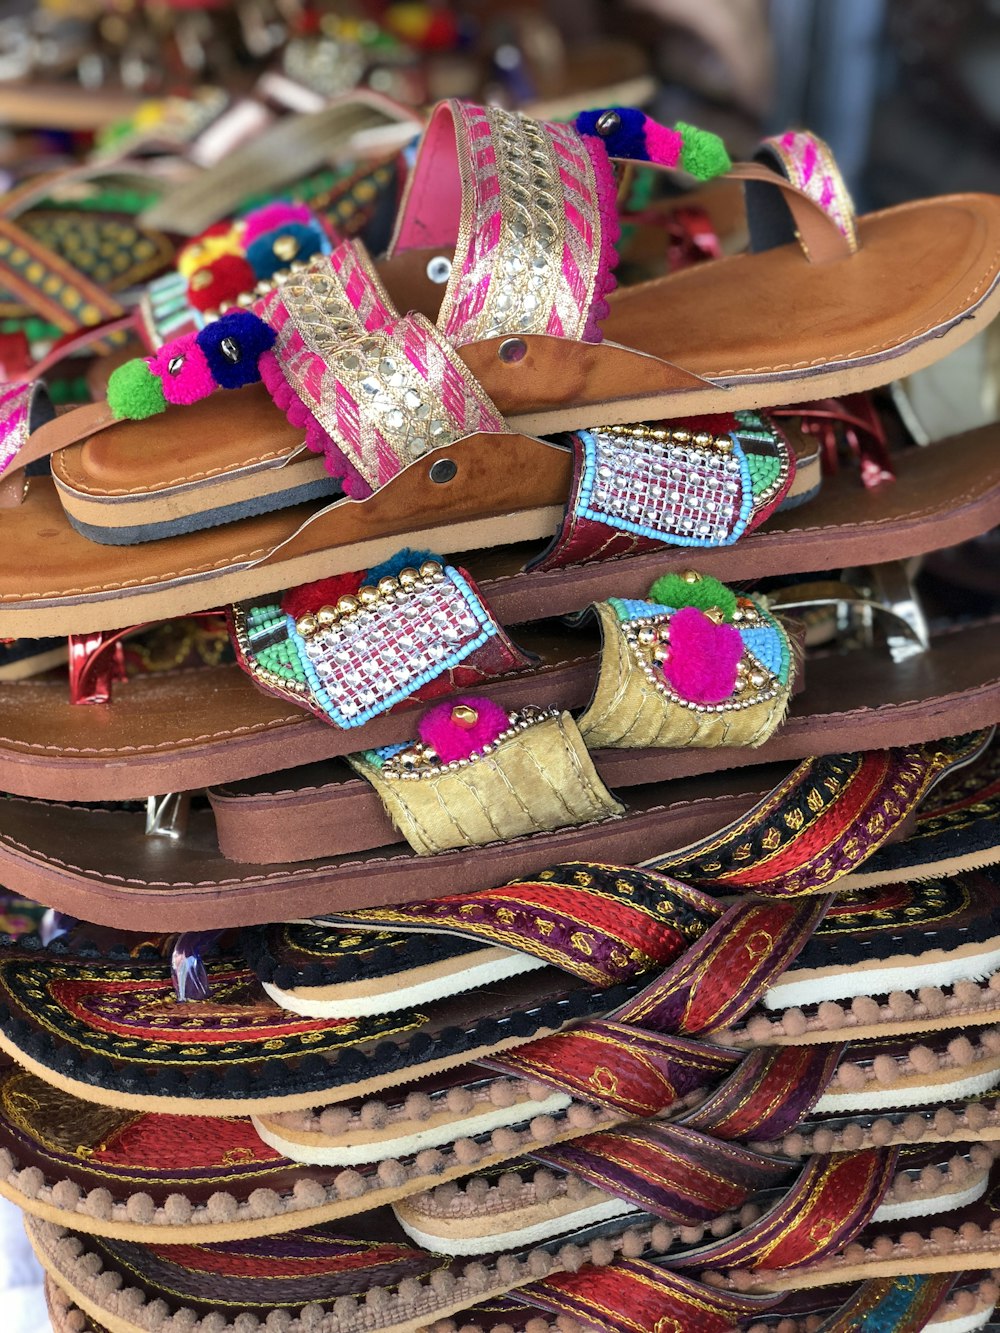 a pile of colorful sandals and sandals on display